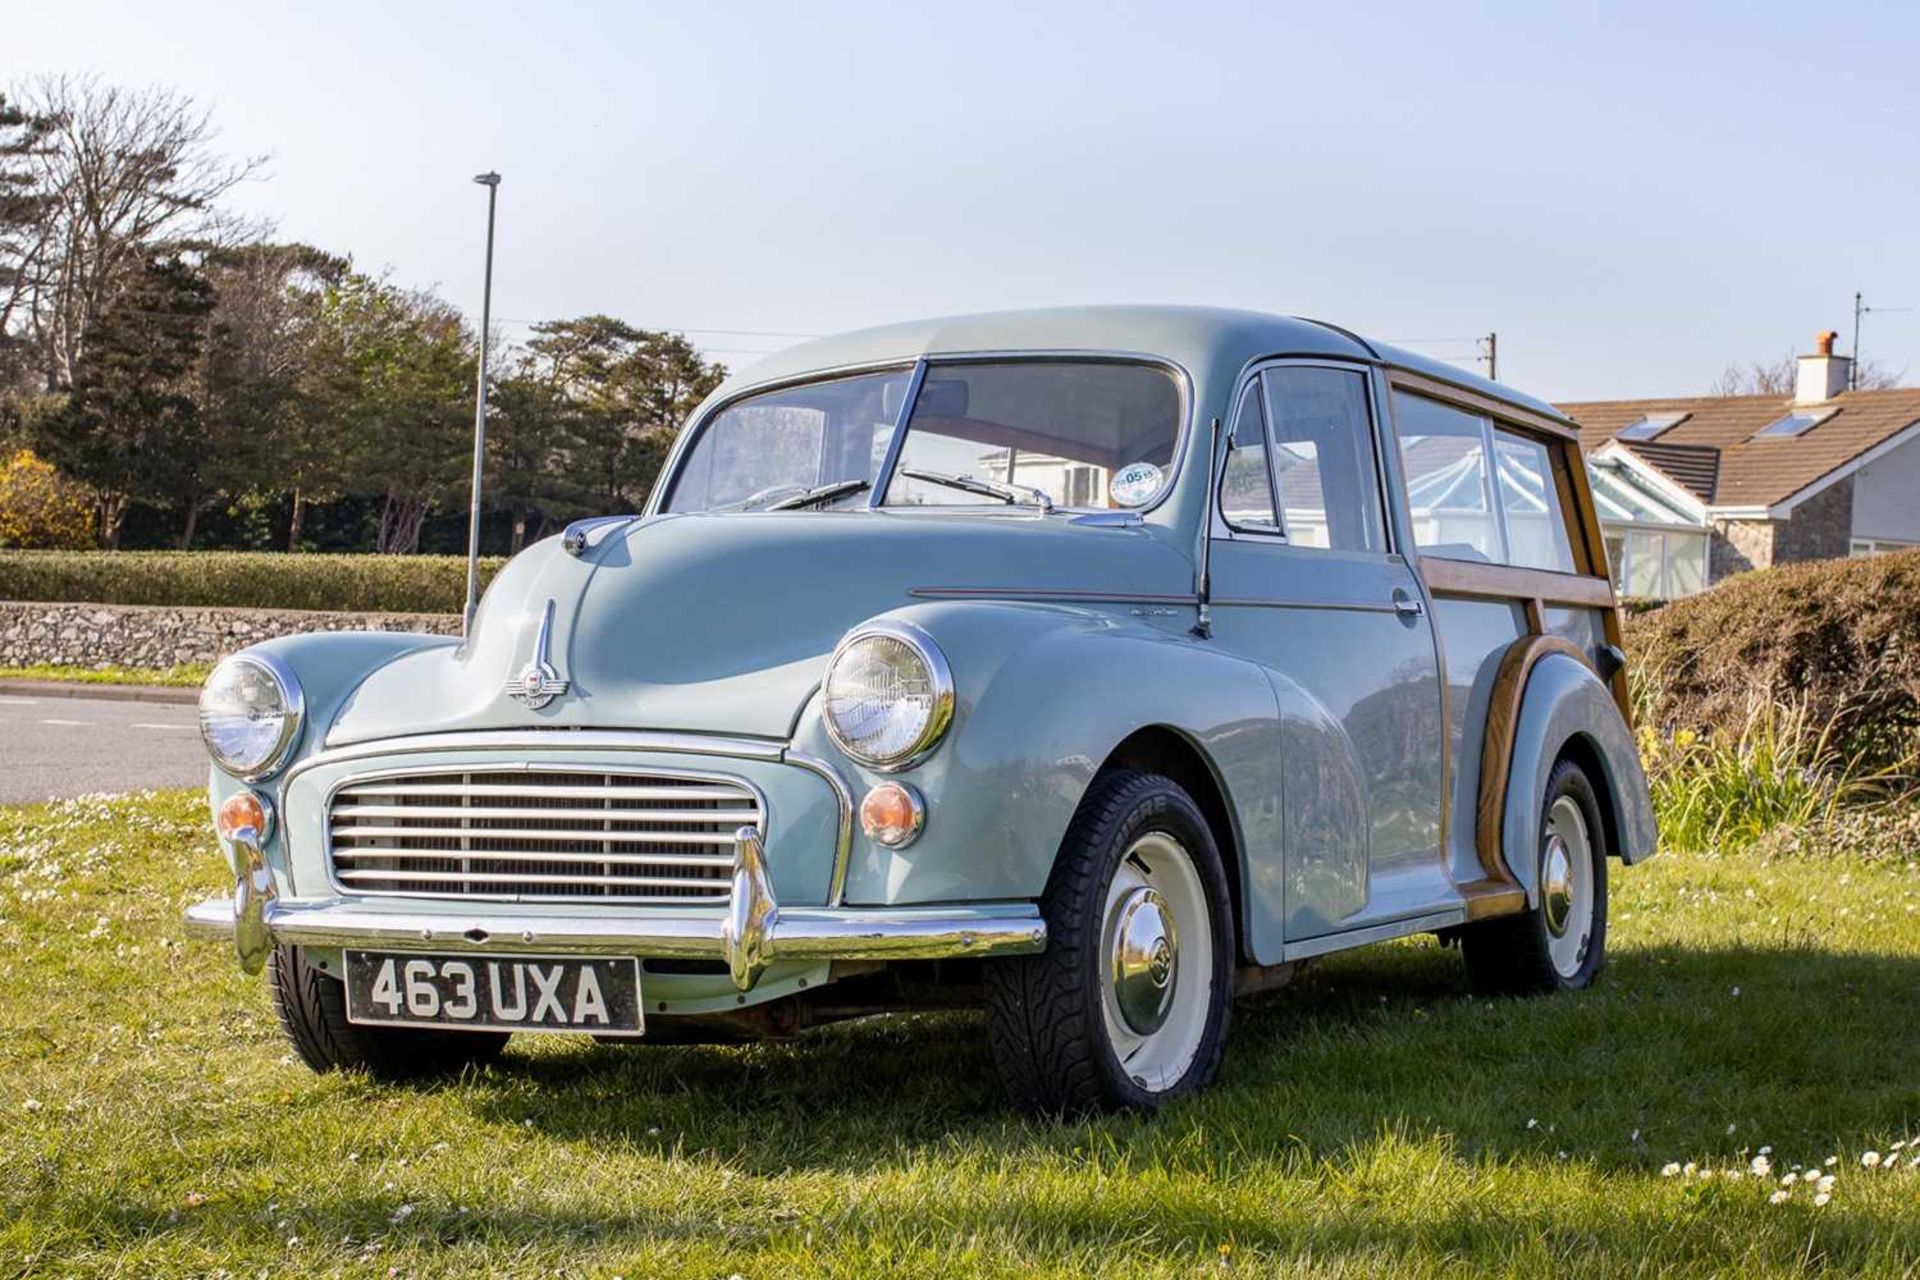 1956 Morris Minor Traveller Uprated with 1275cc engine  - Image 29 of 89